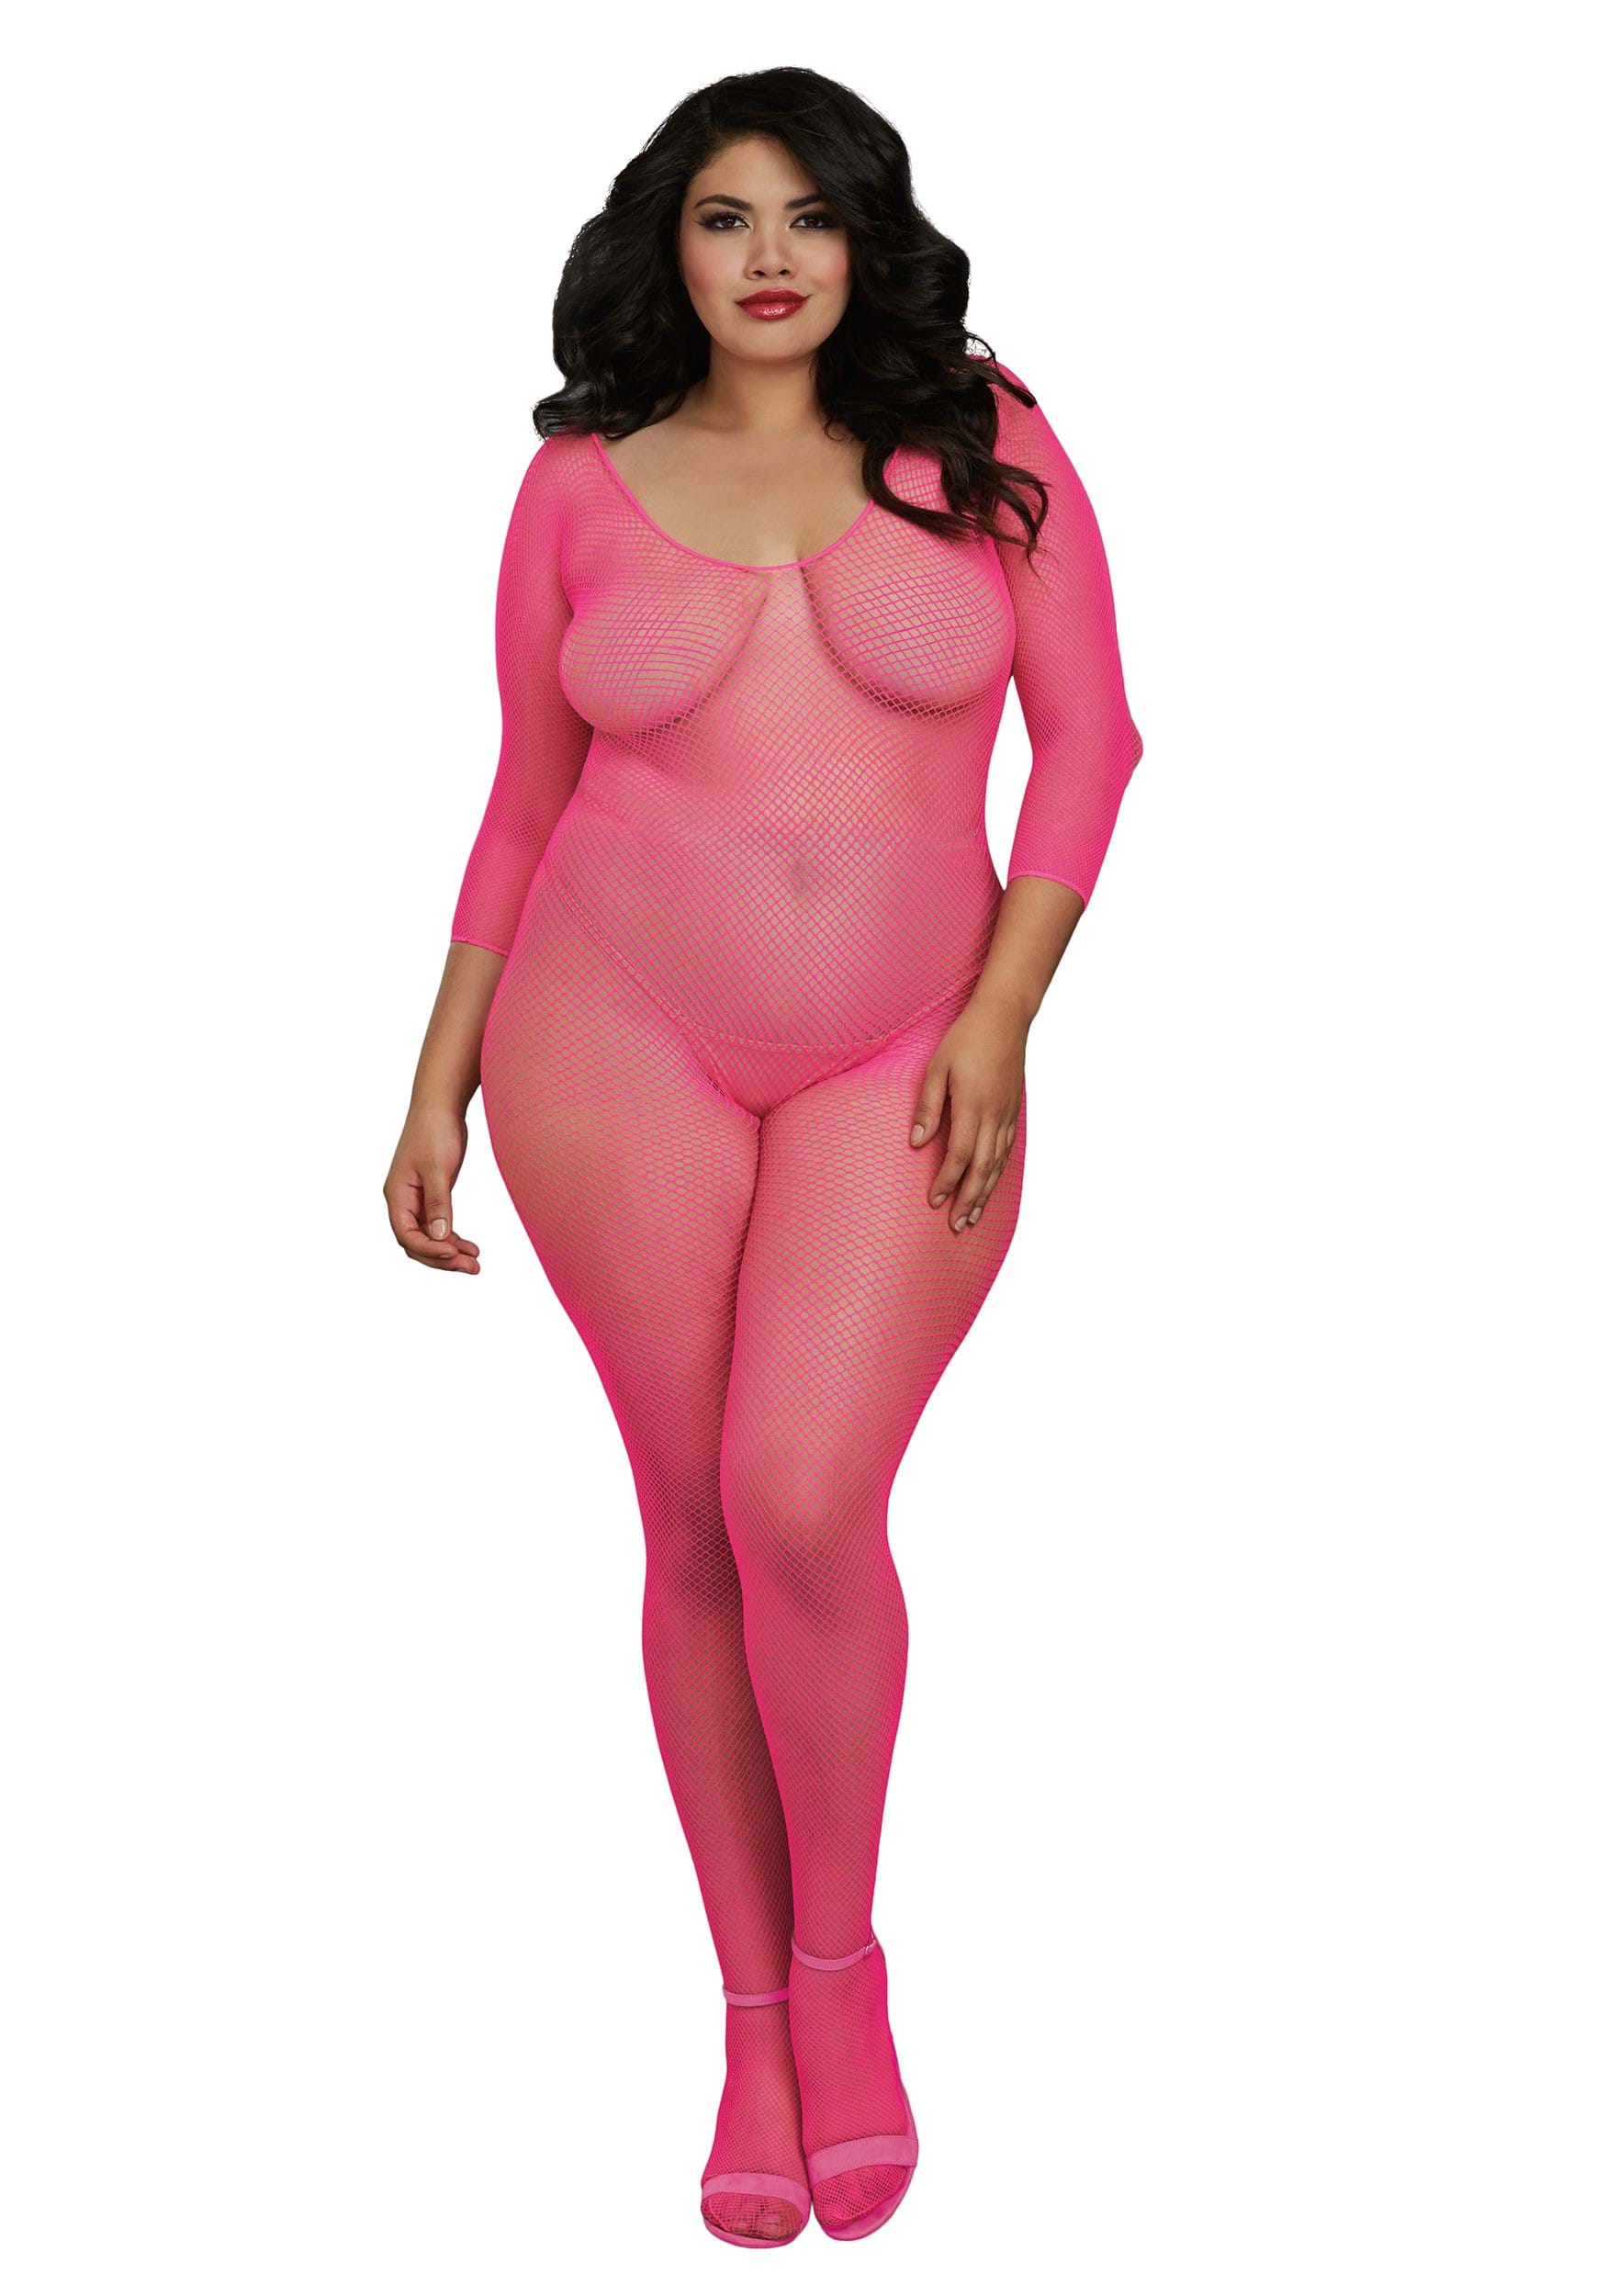 Plus Size Women's Pink Fishnet Body Stocking , Sexy Accessories